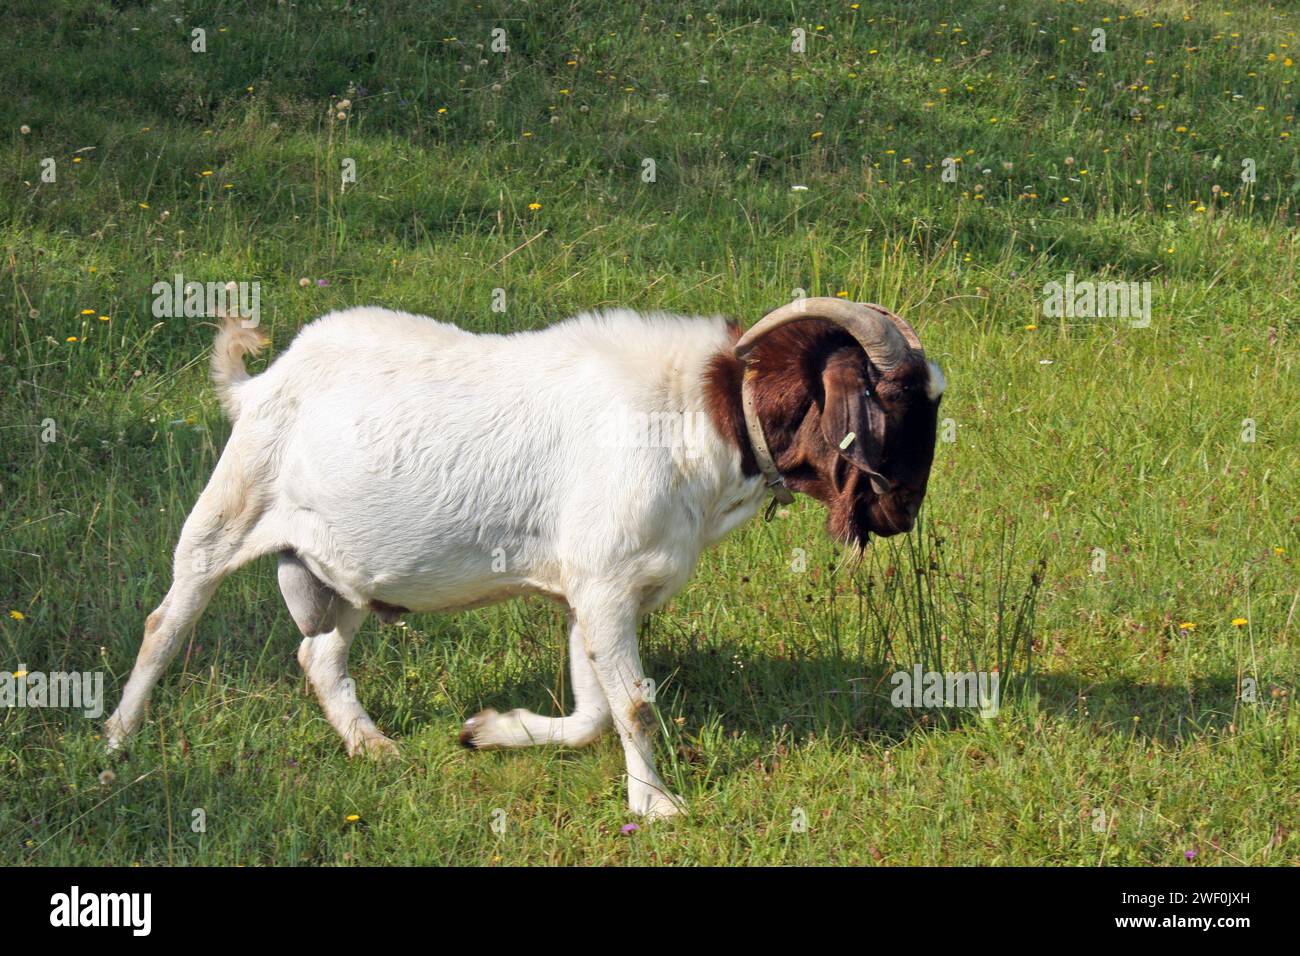 White goat with brown head and horns on green grass Stock Photo